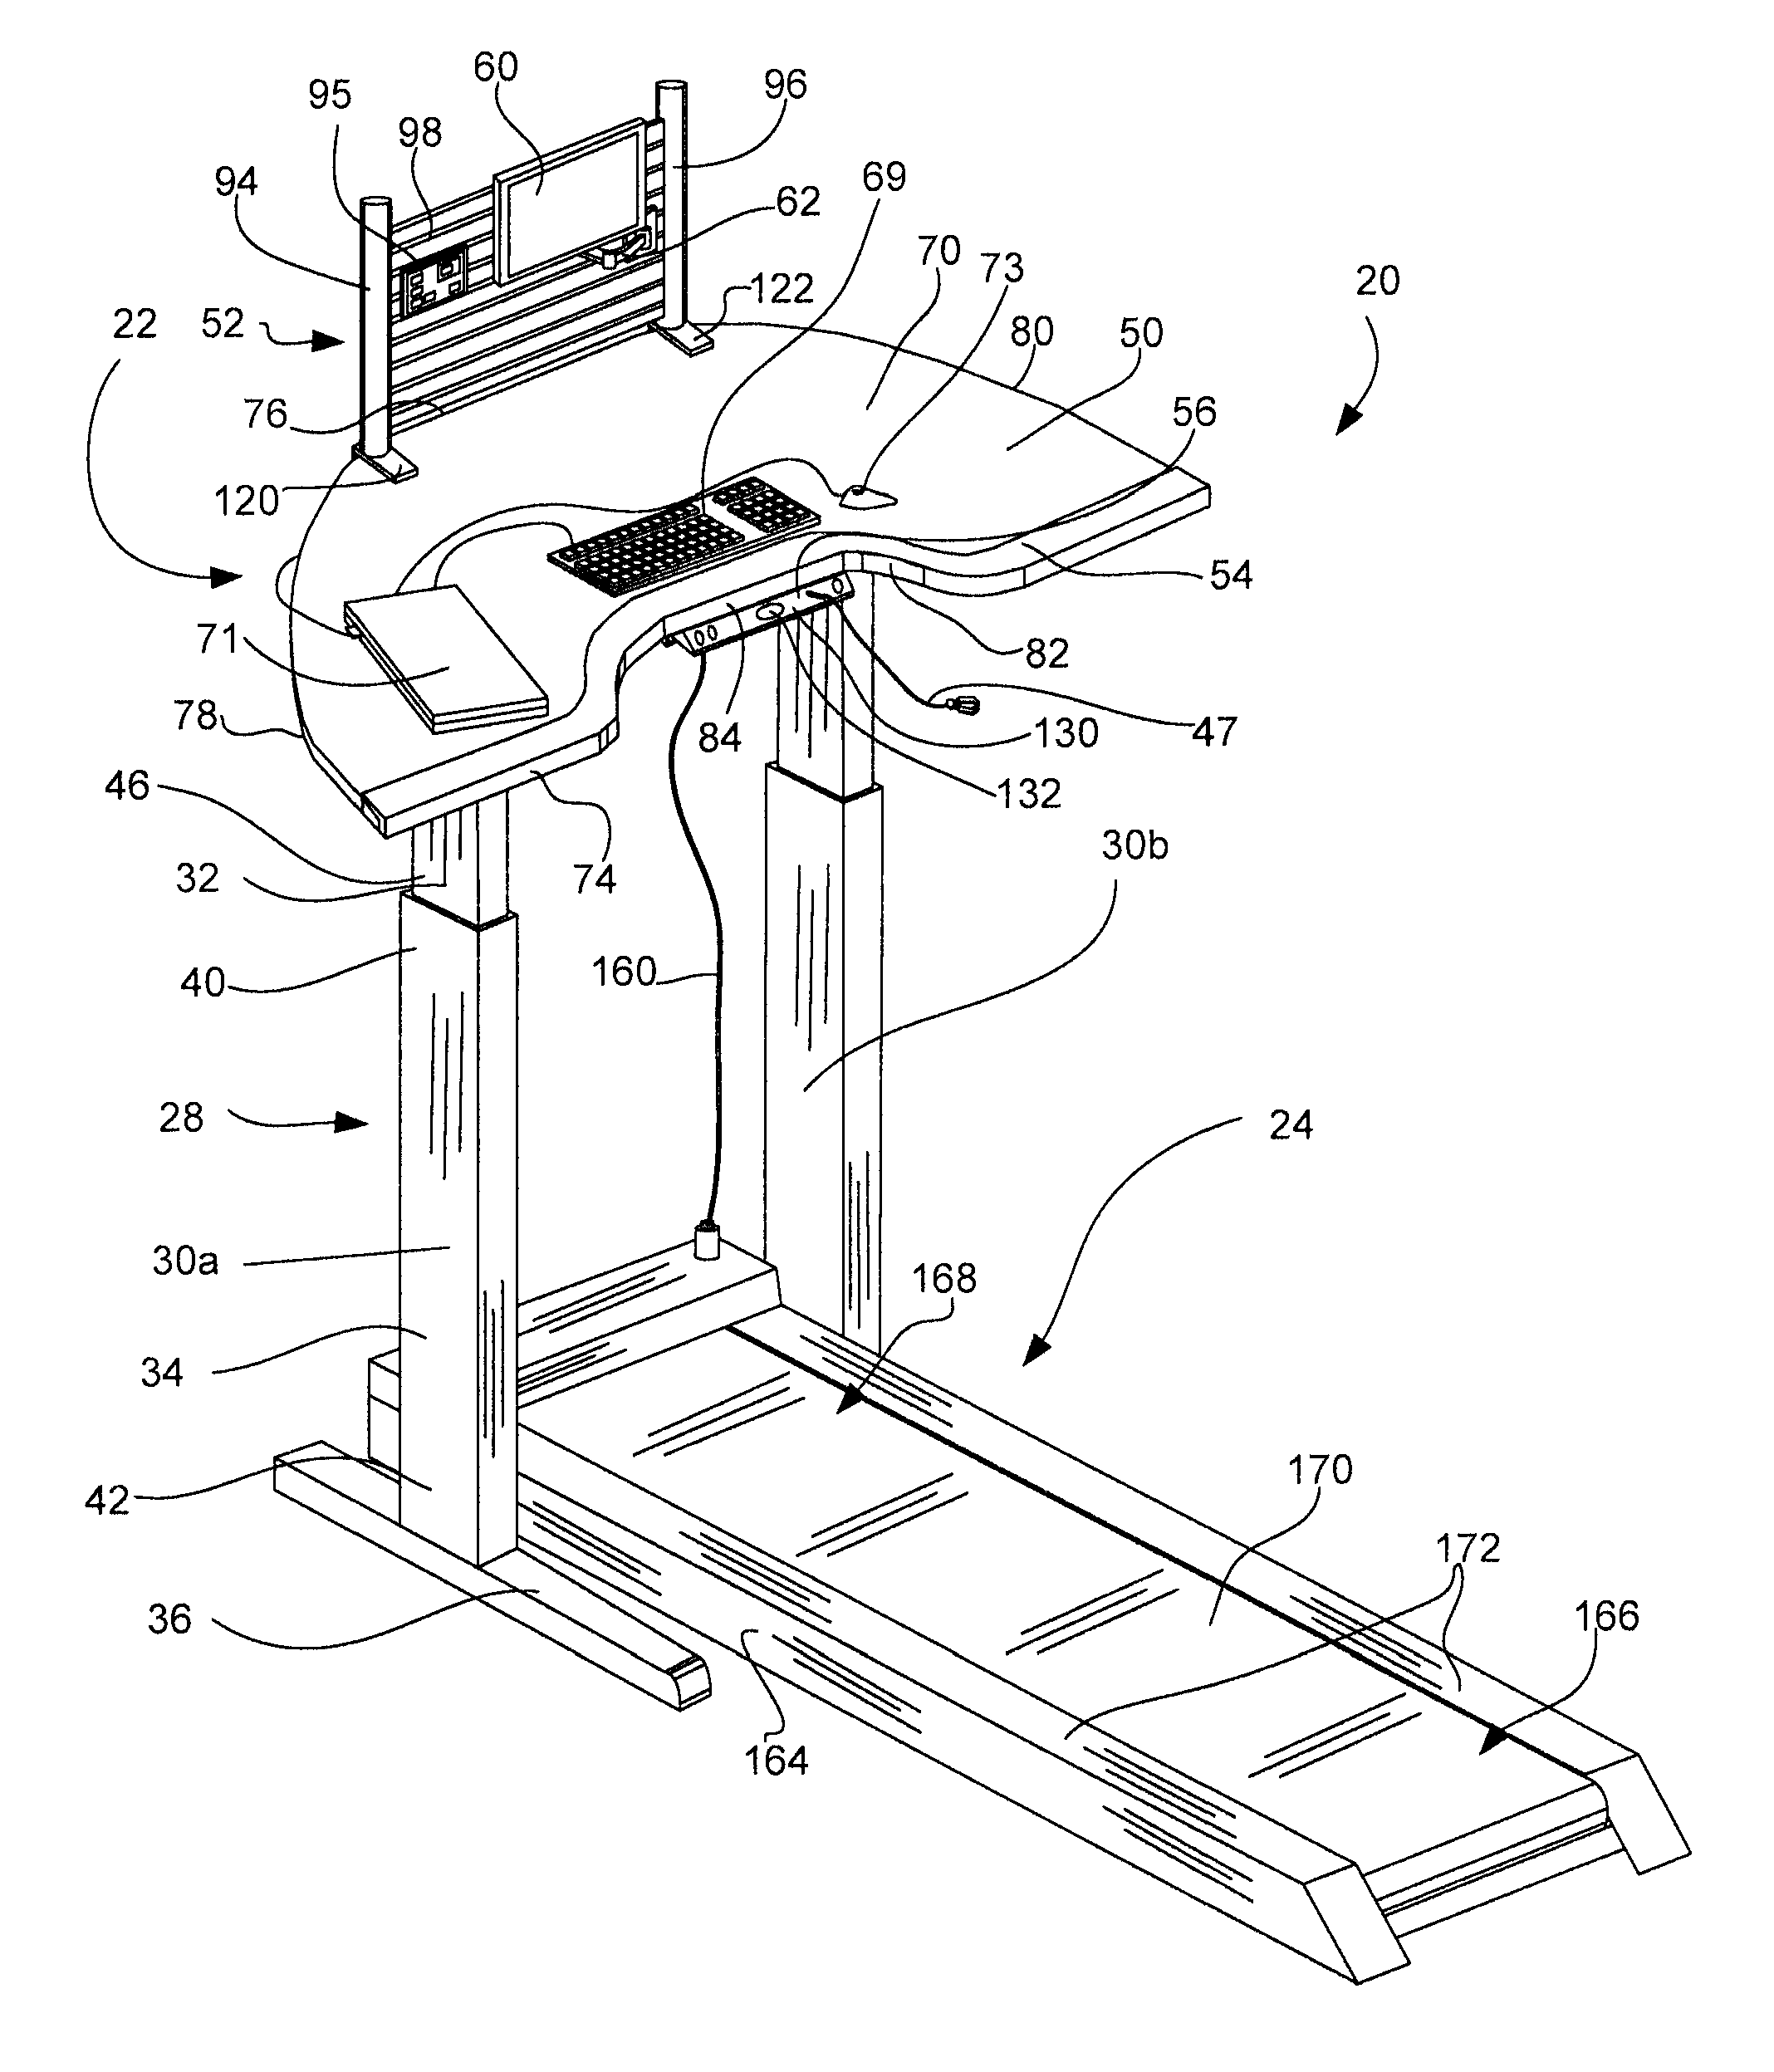 System and method for integrating exercise equipment with a worksurface assembly